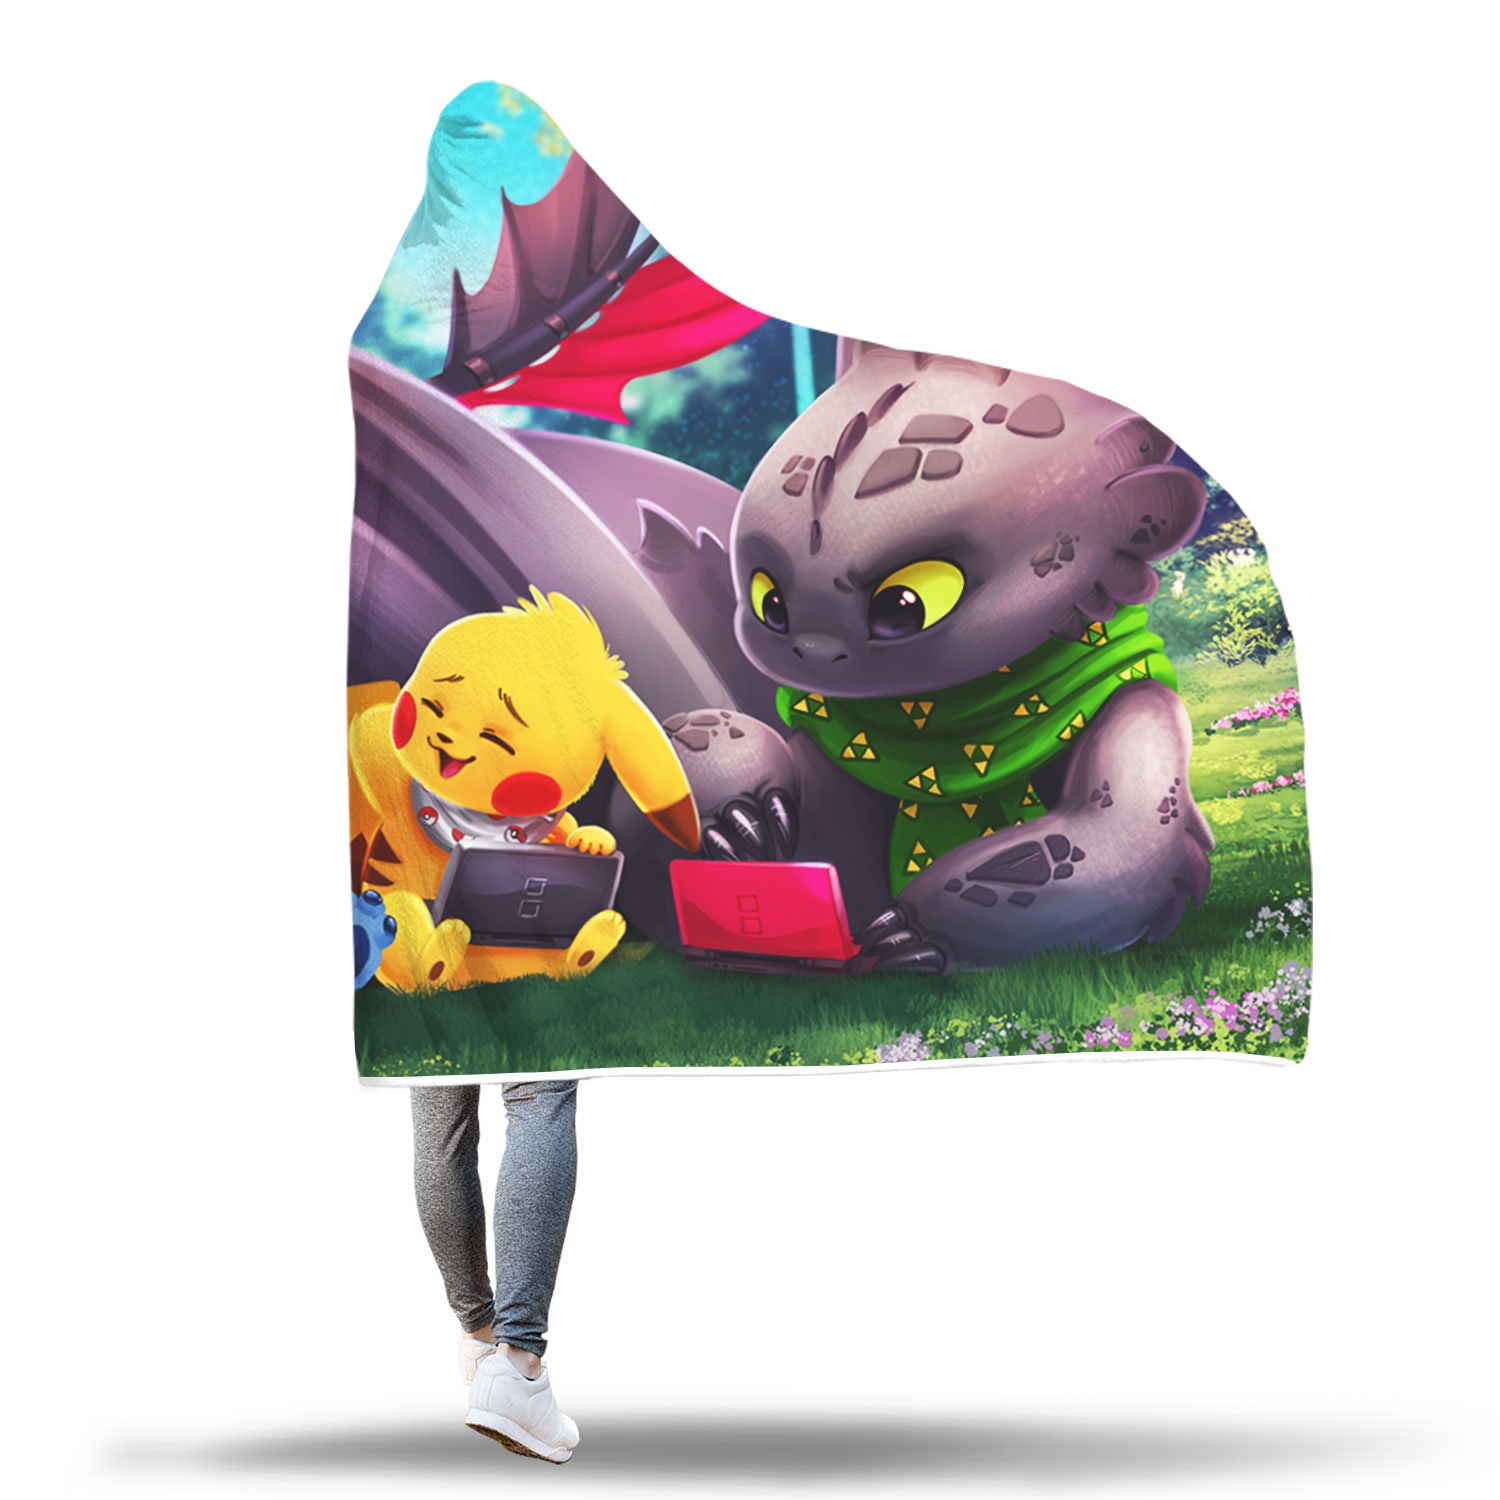 Stitch Pikachu Toothless Hooded Blanket